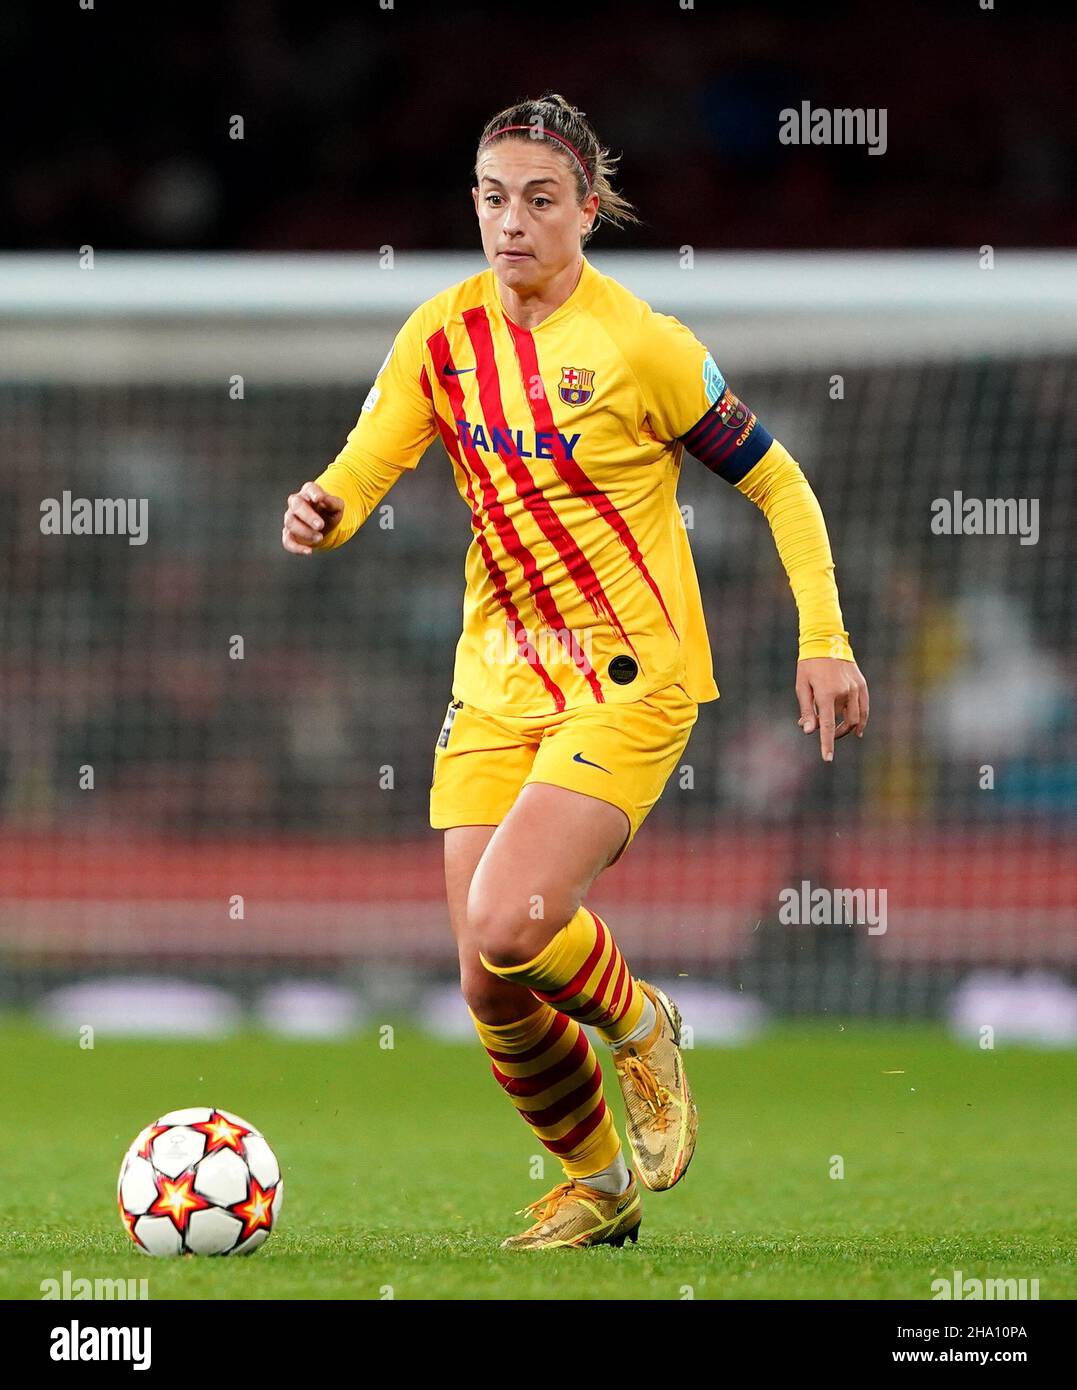 Barcelona's Alexia Putellas Segura during the UEFA Women's Champions League, Group C match at Emirates Stadium, London. Picture date: Thursday December 9, 2021. Stock Photo